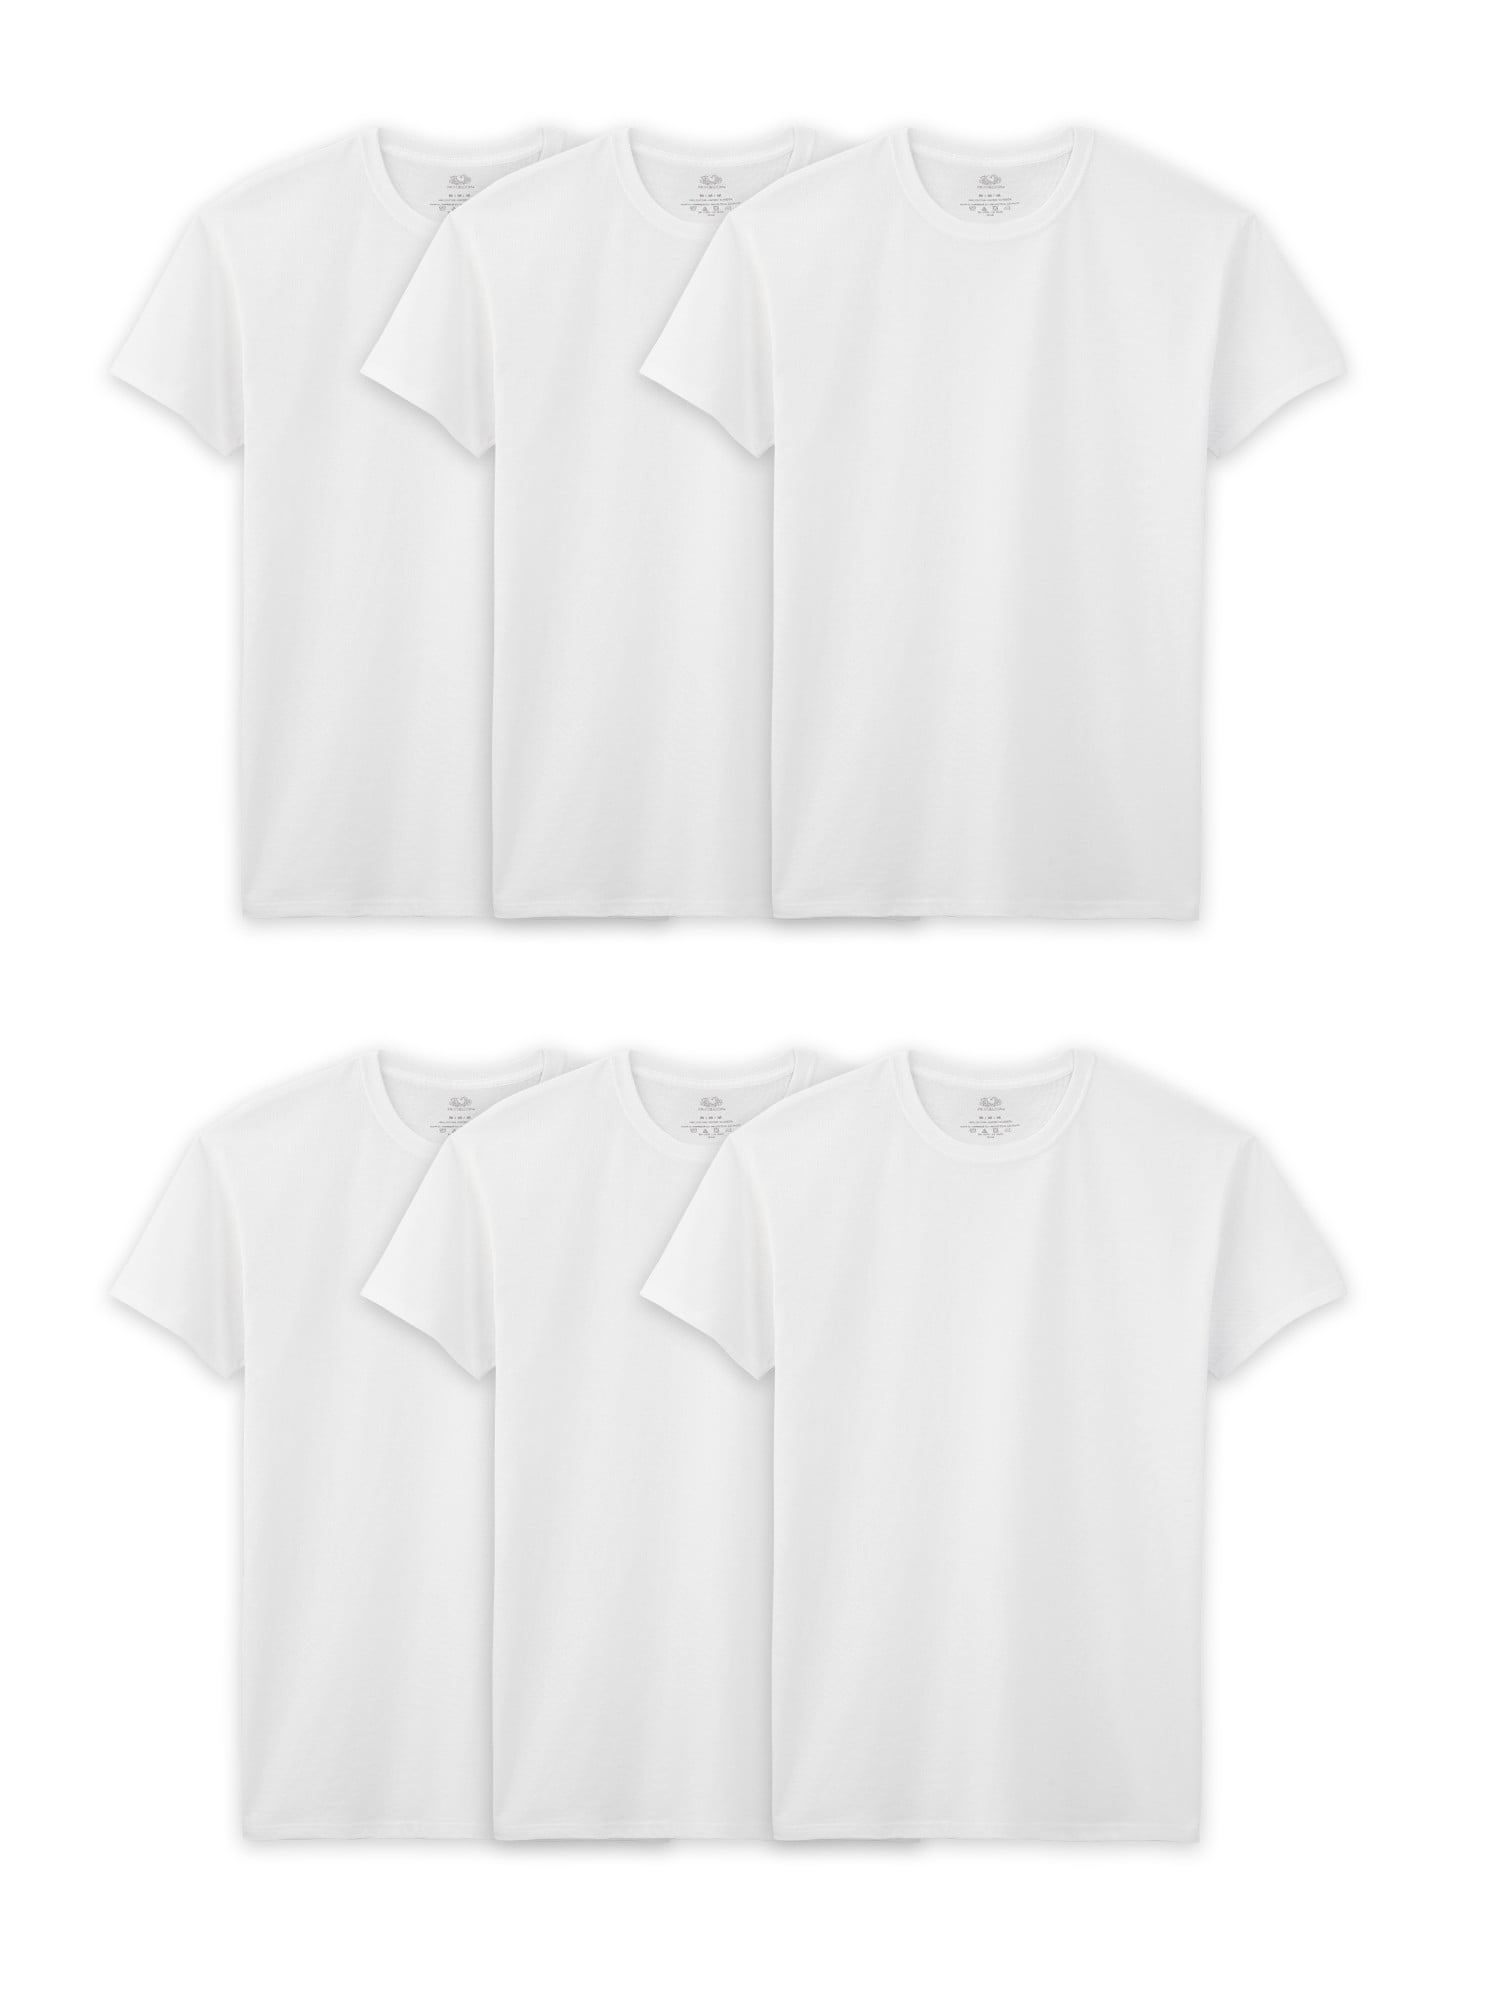 Fruit of the Loom Men's White Crew Undershirts, 6 Pack, Sizes S-3XL ...